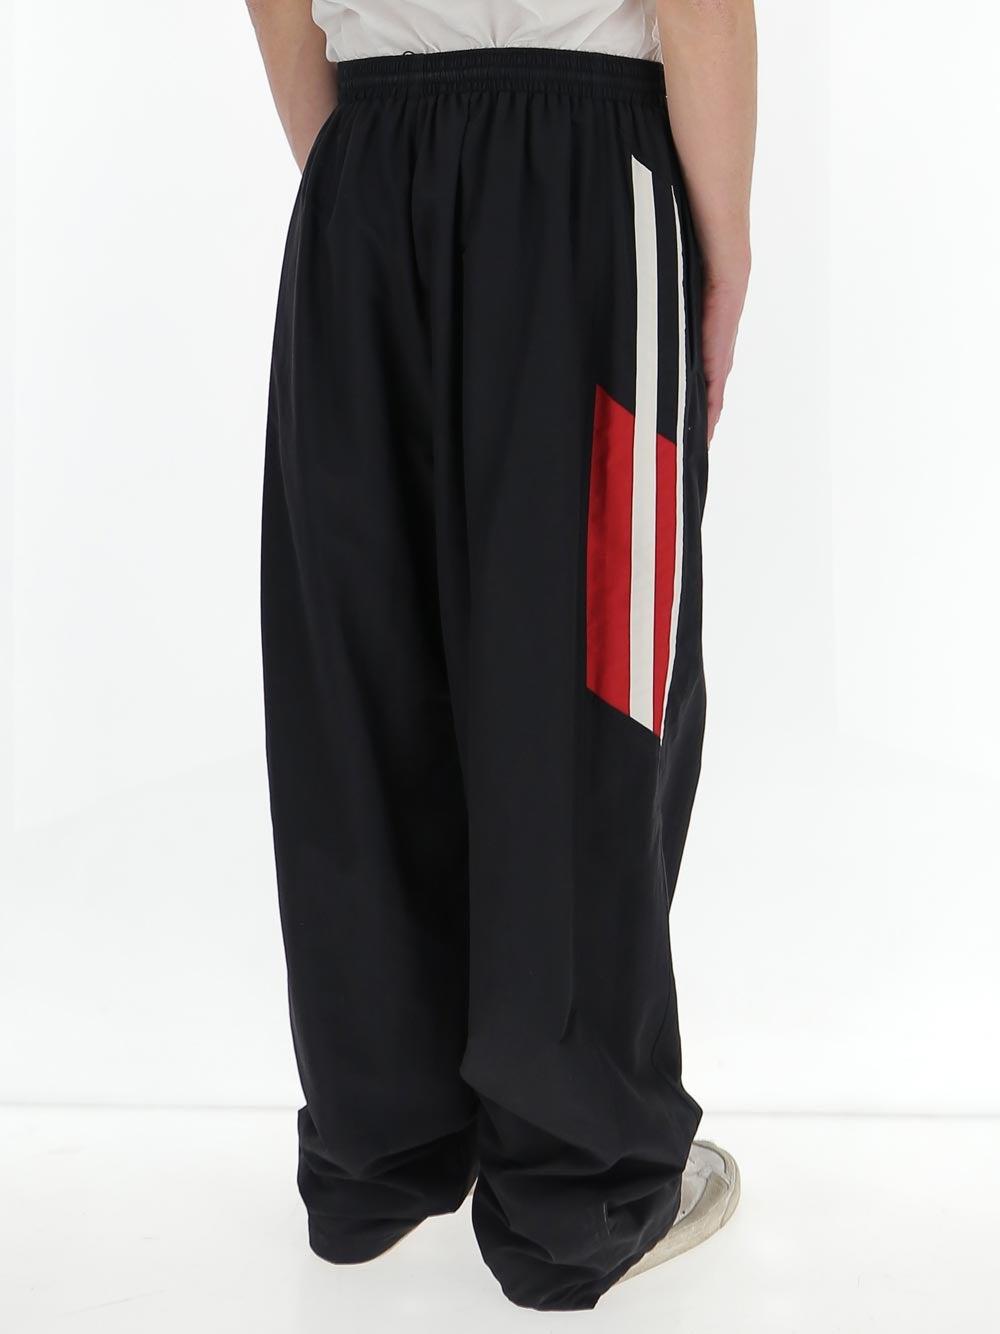 BALENCIAGA Distressed embroidered cottonjersey track pants  NETAPORTER